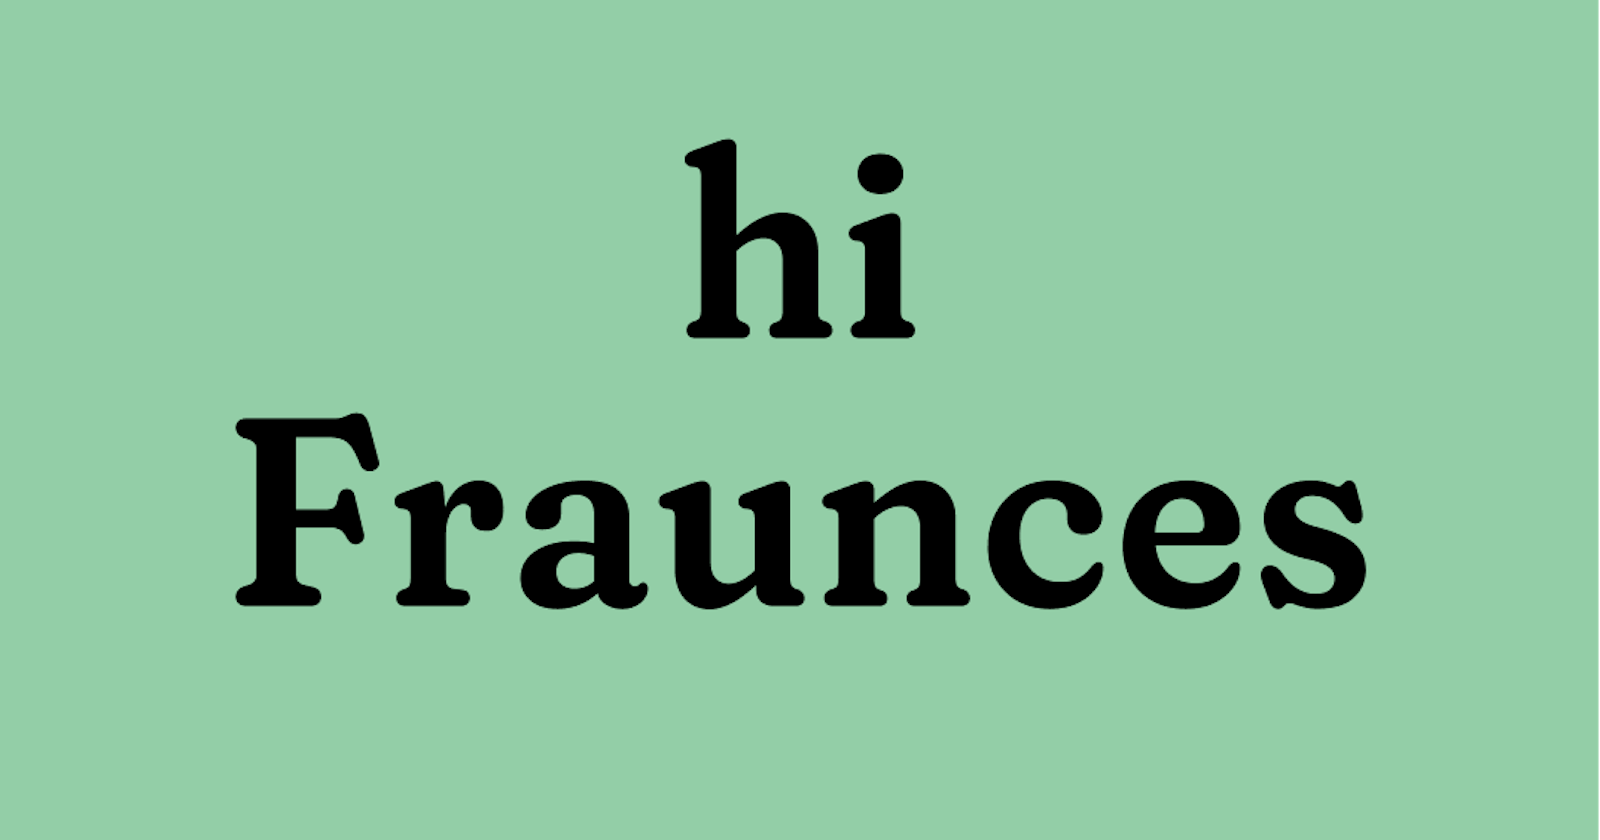 Communicate Friendly Wonkiness with the Font Fraunces